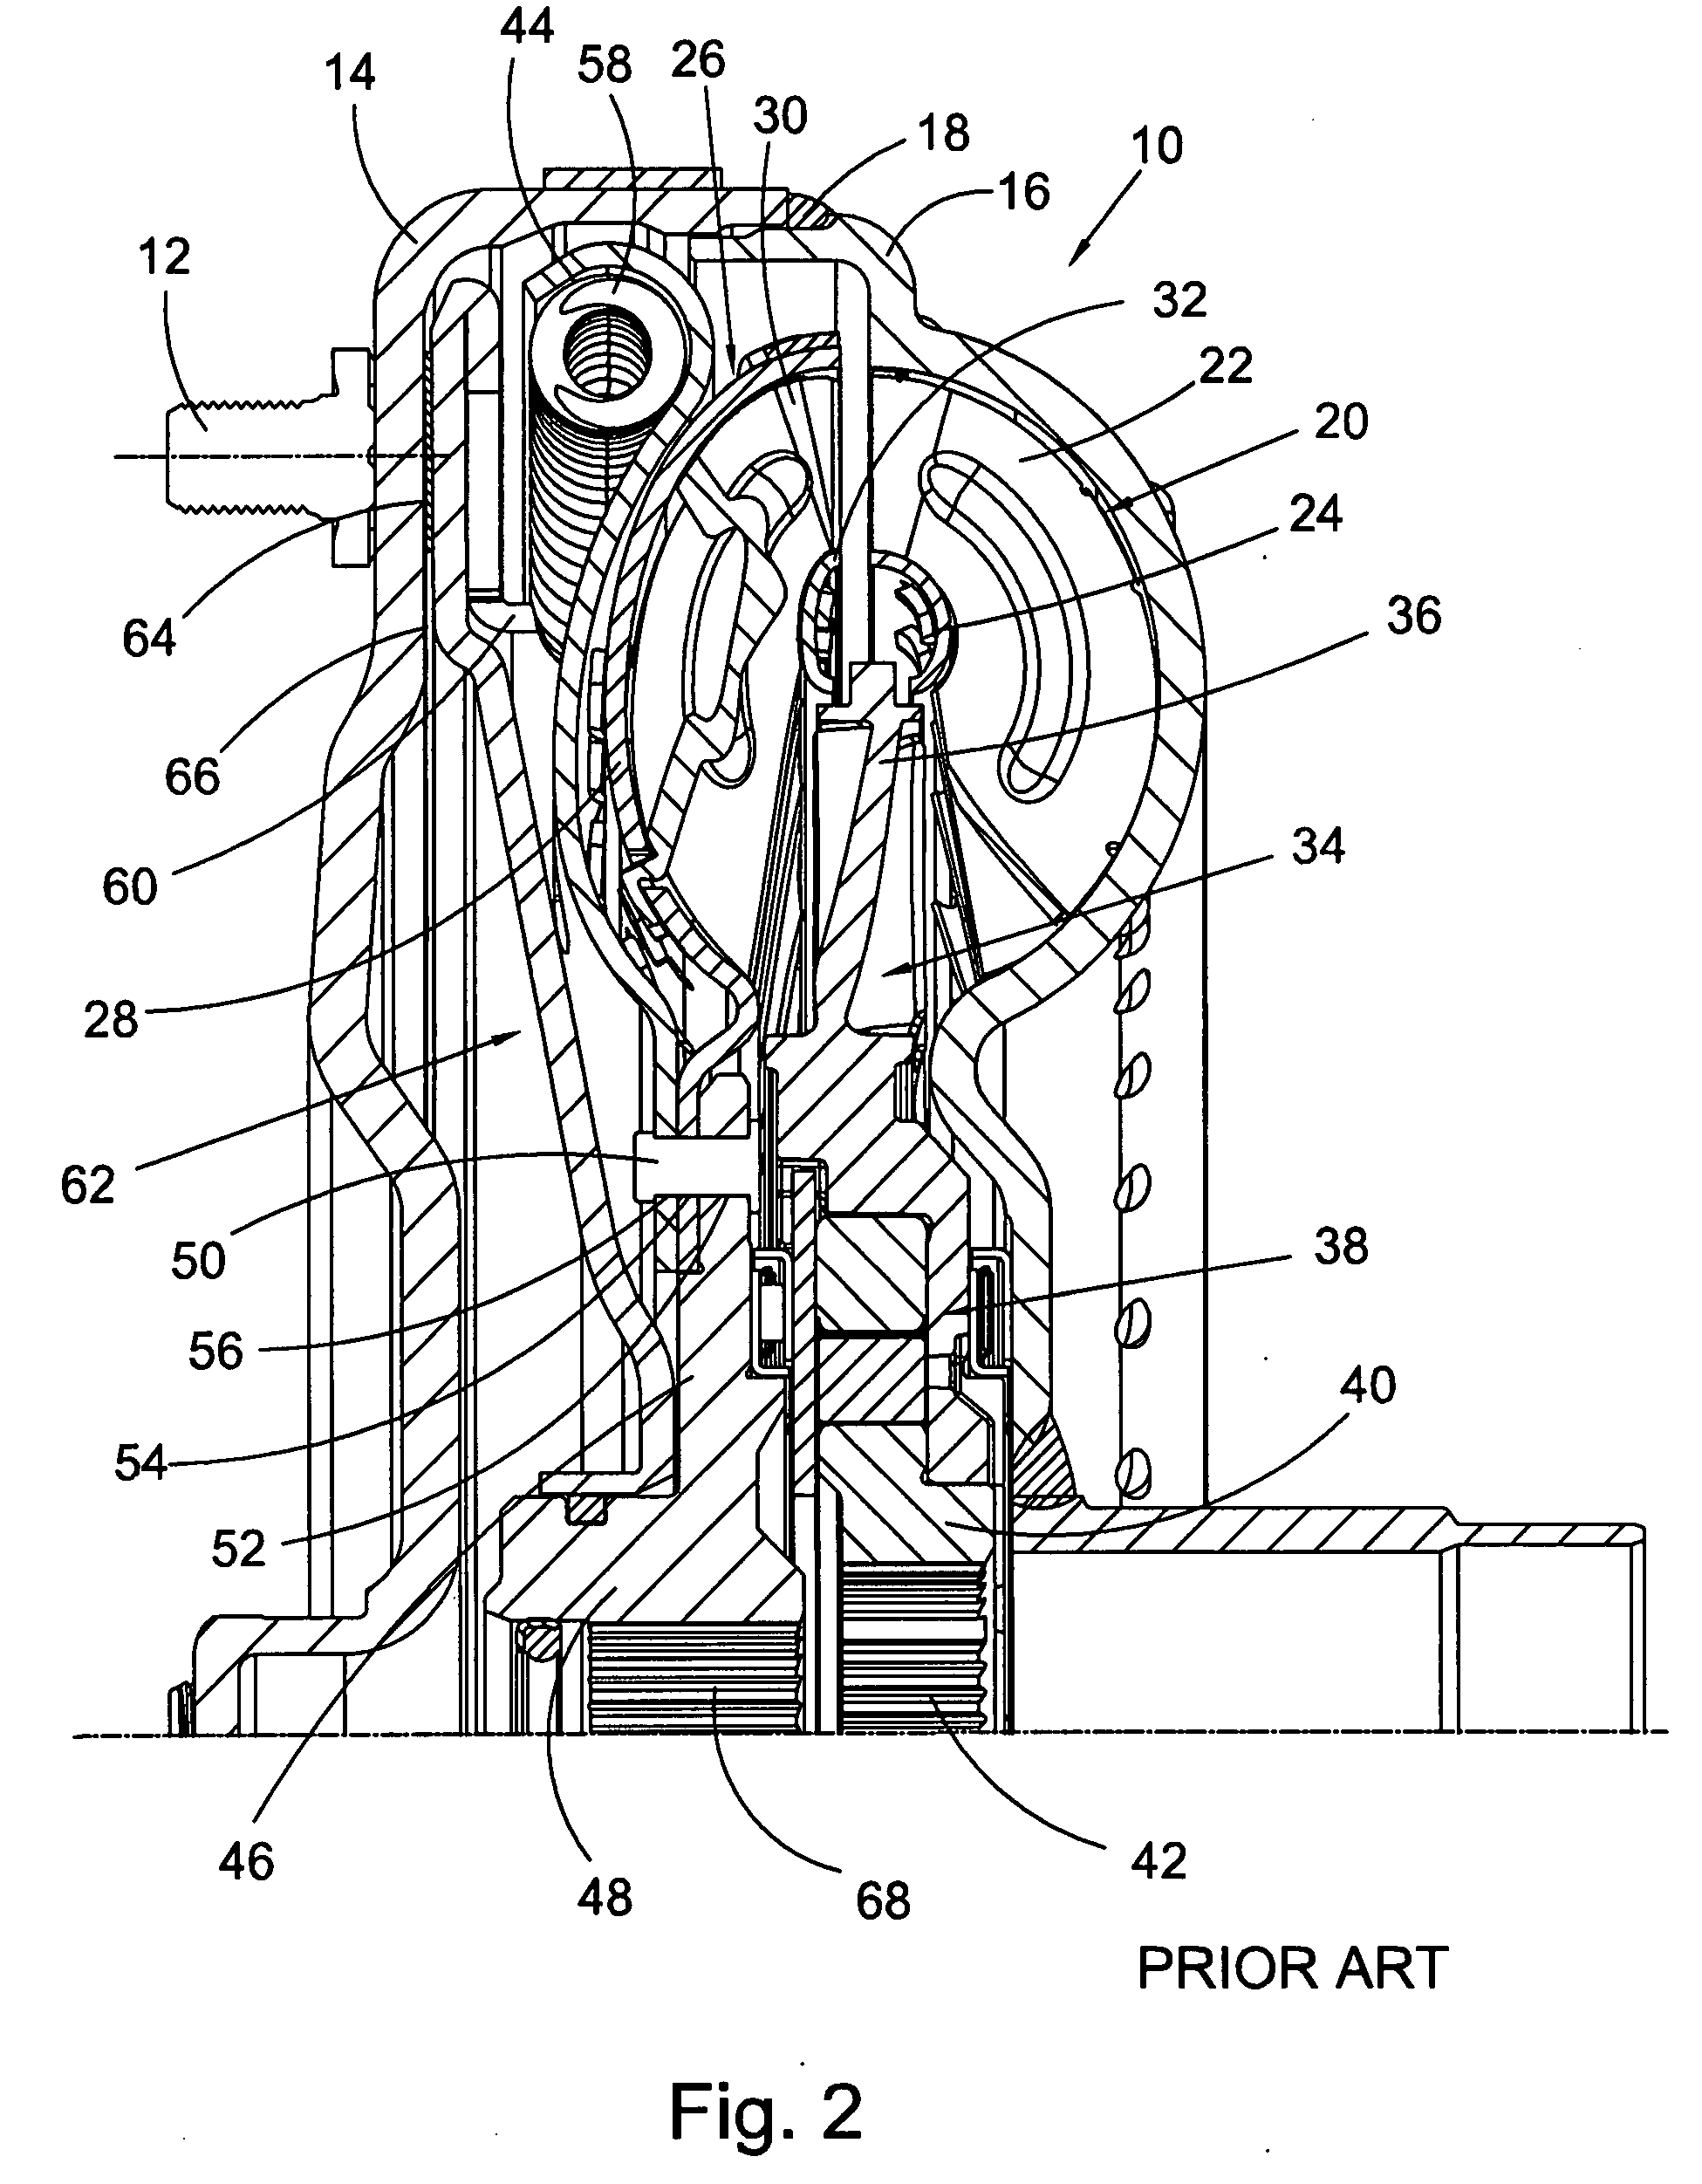 Apparatus for joining components to a hub